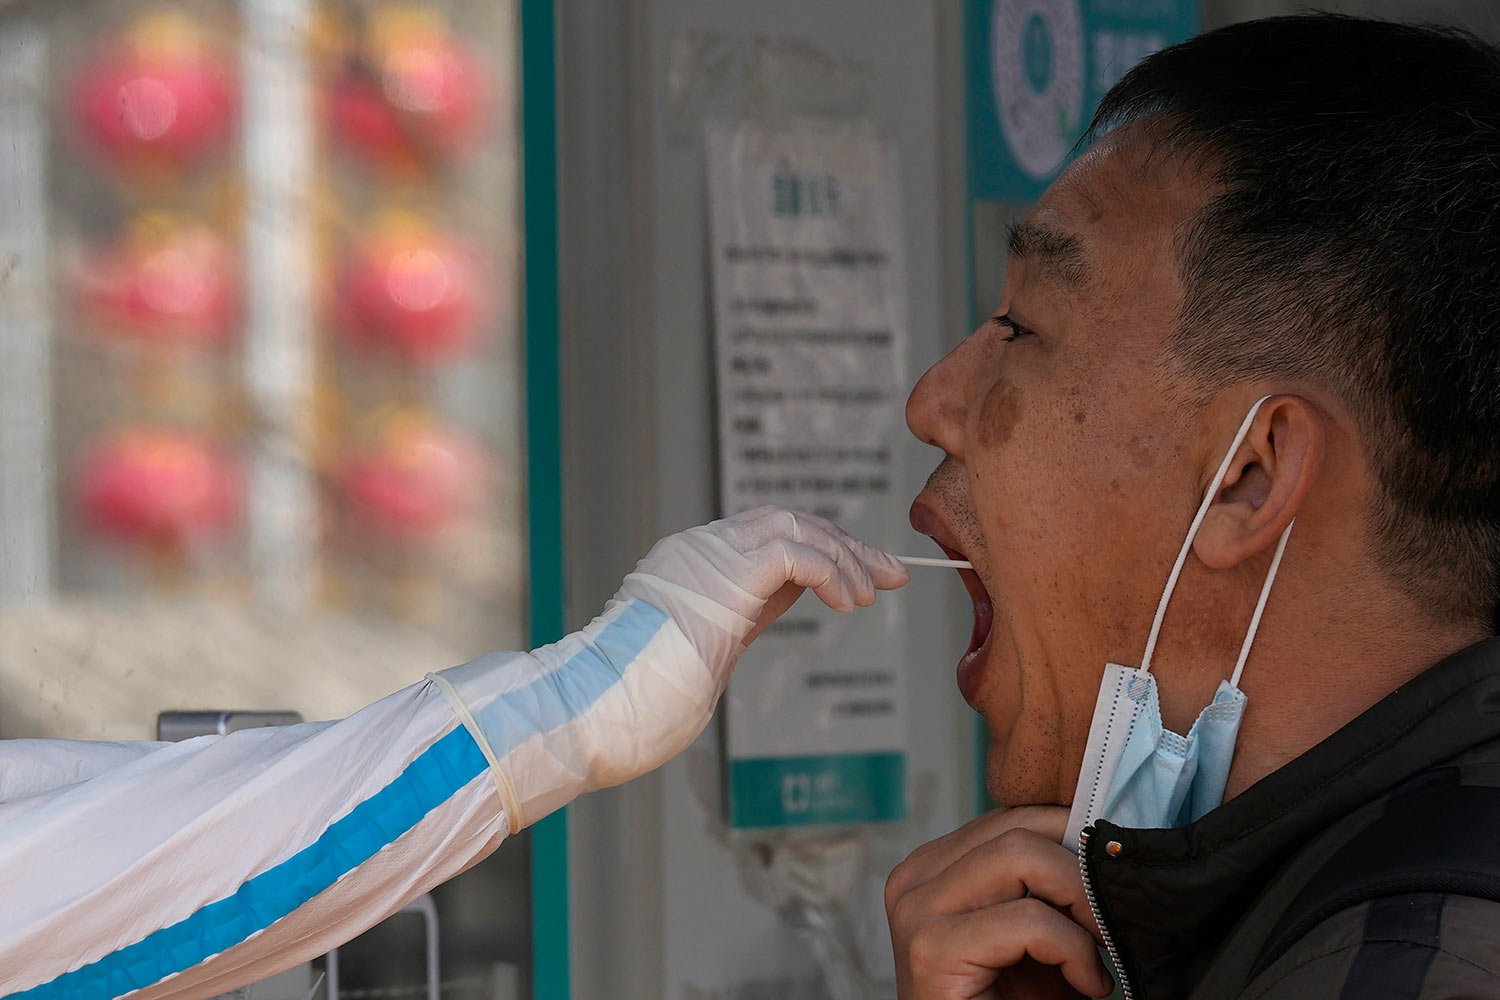  A worker takes a swab sample for a COVID-19 test at a mobile testing site on Tuesday, March 15, 2022, in Beijing.  (AP Photo/Ng Han Guan) 